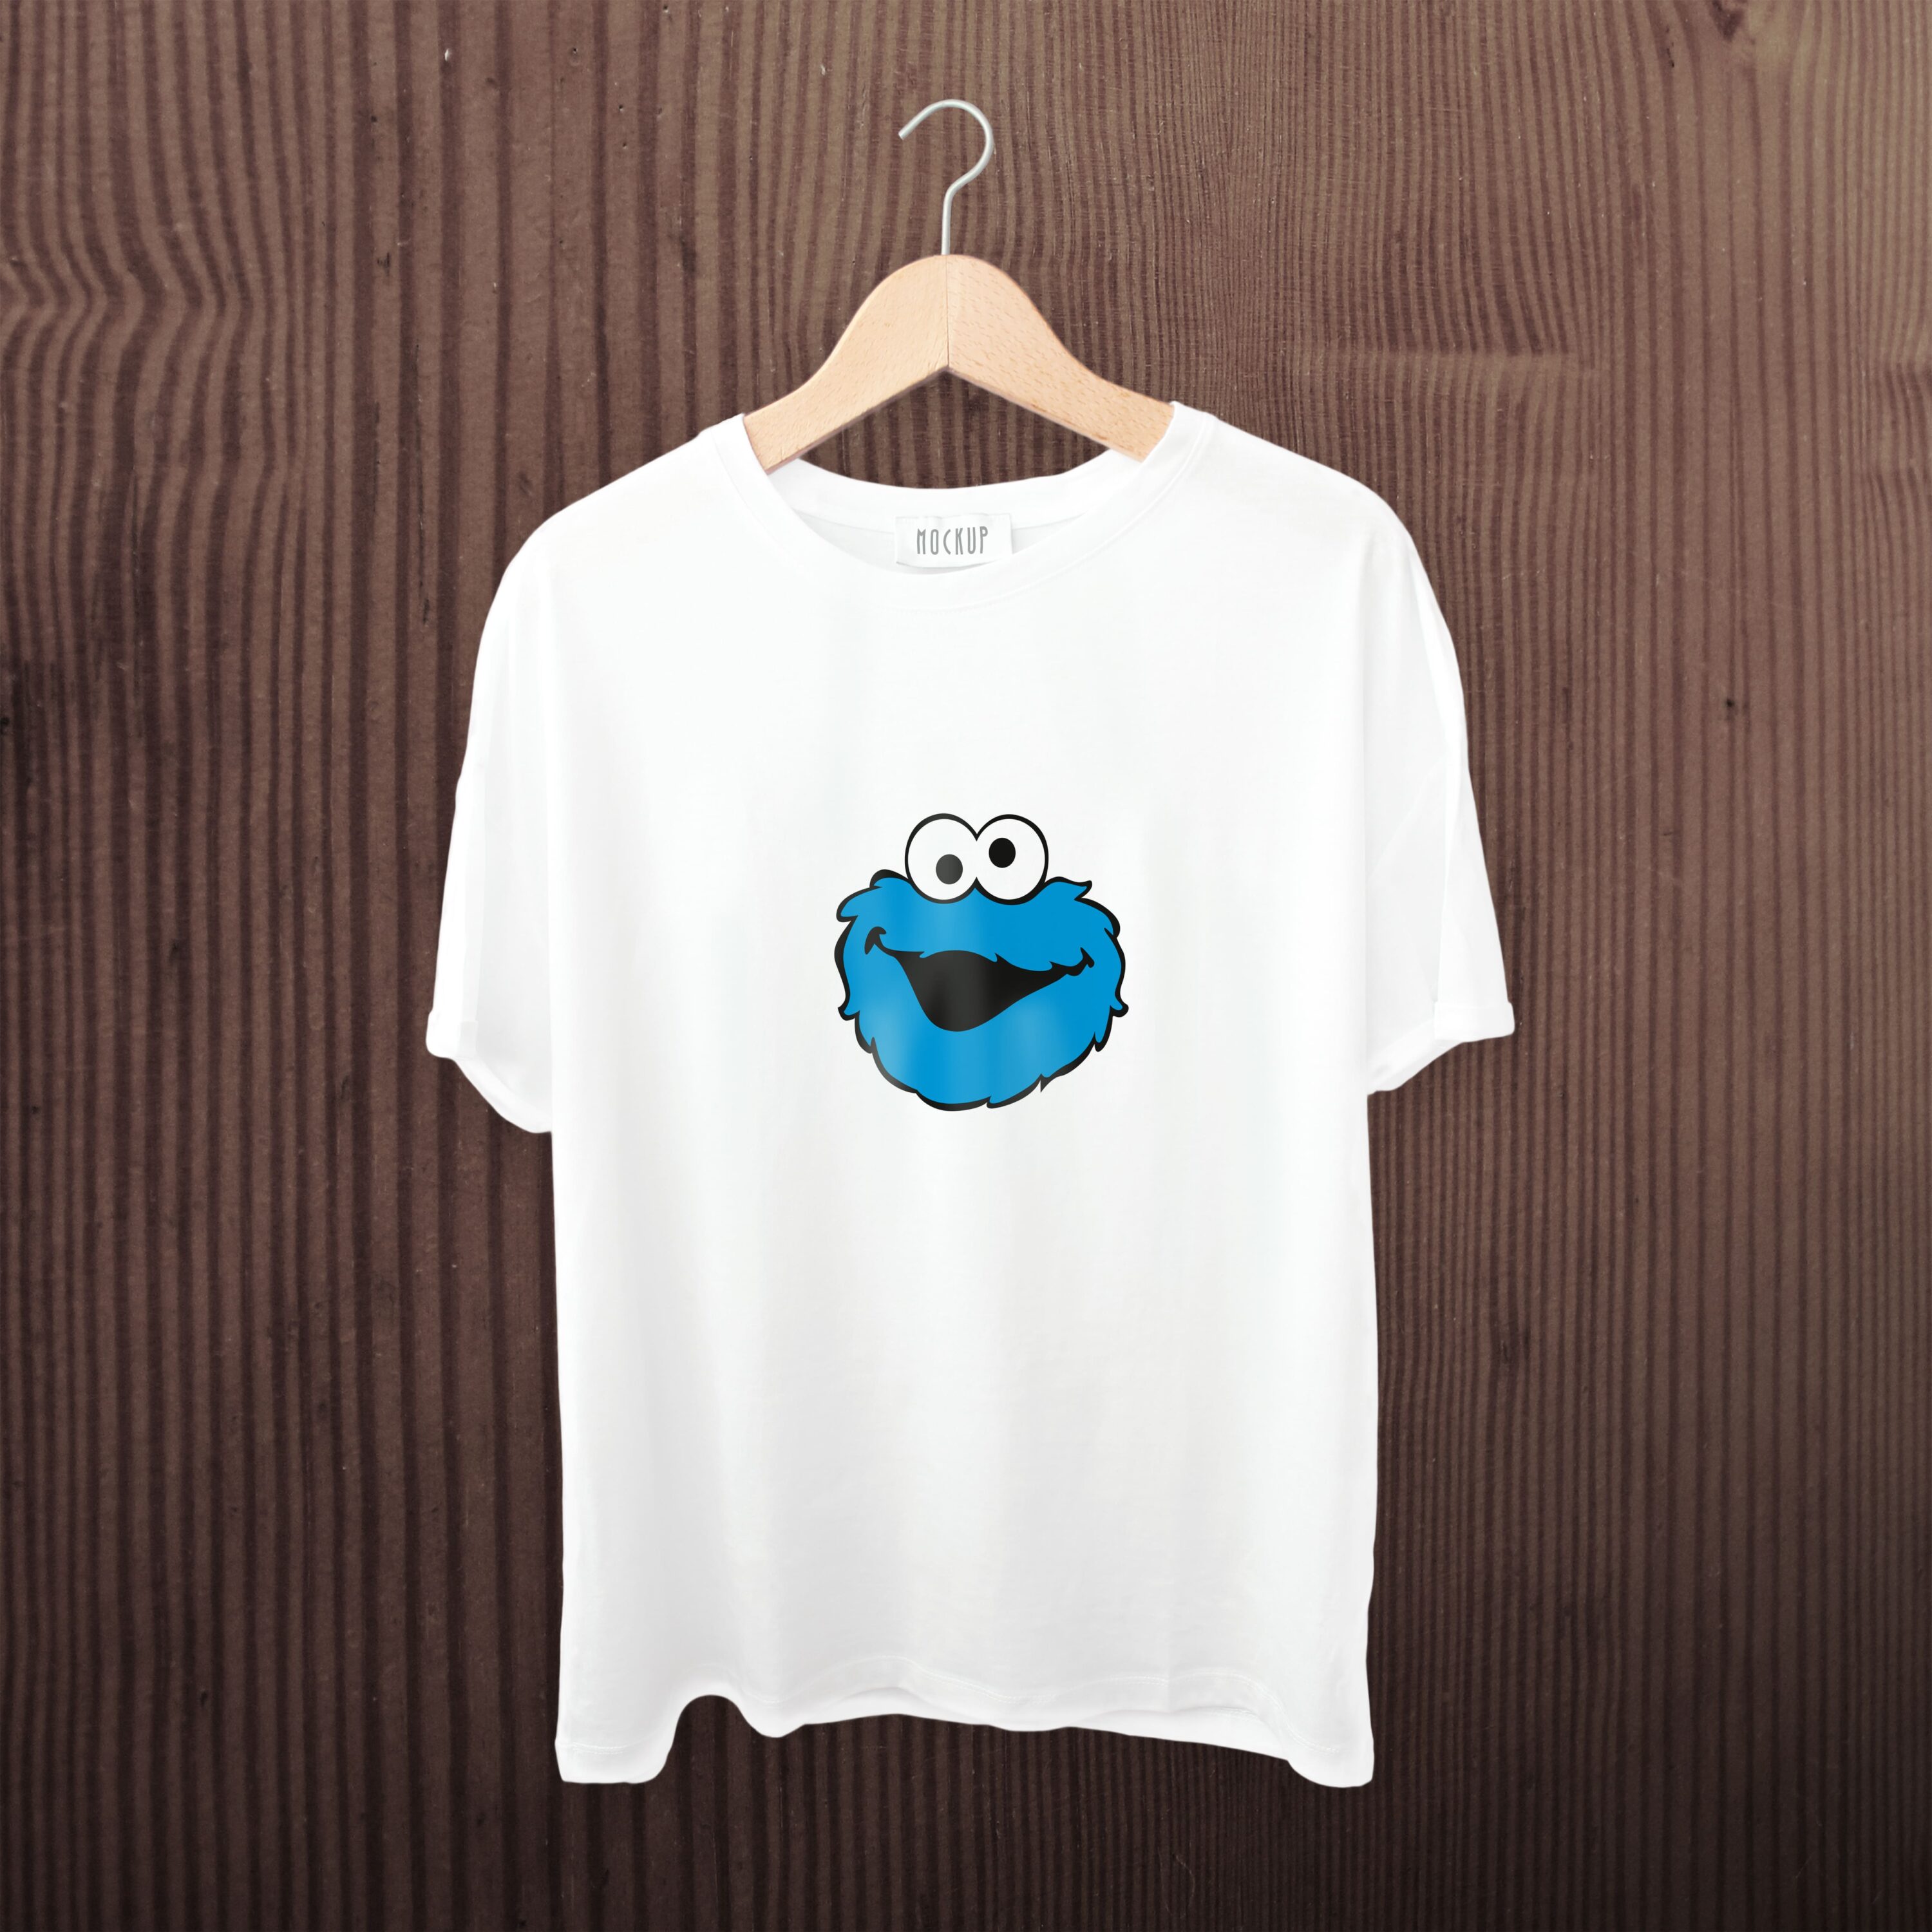 A white t-shirt with a smiling cookie monster face.